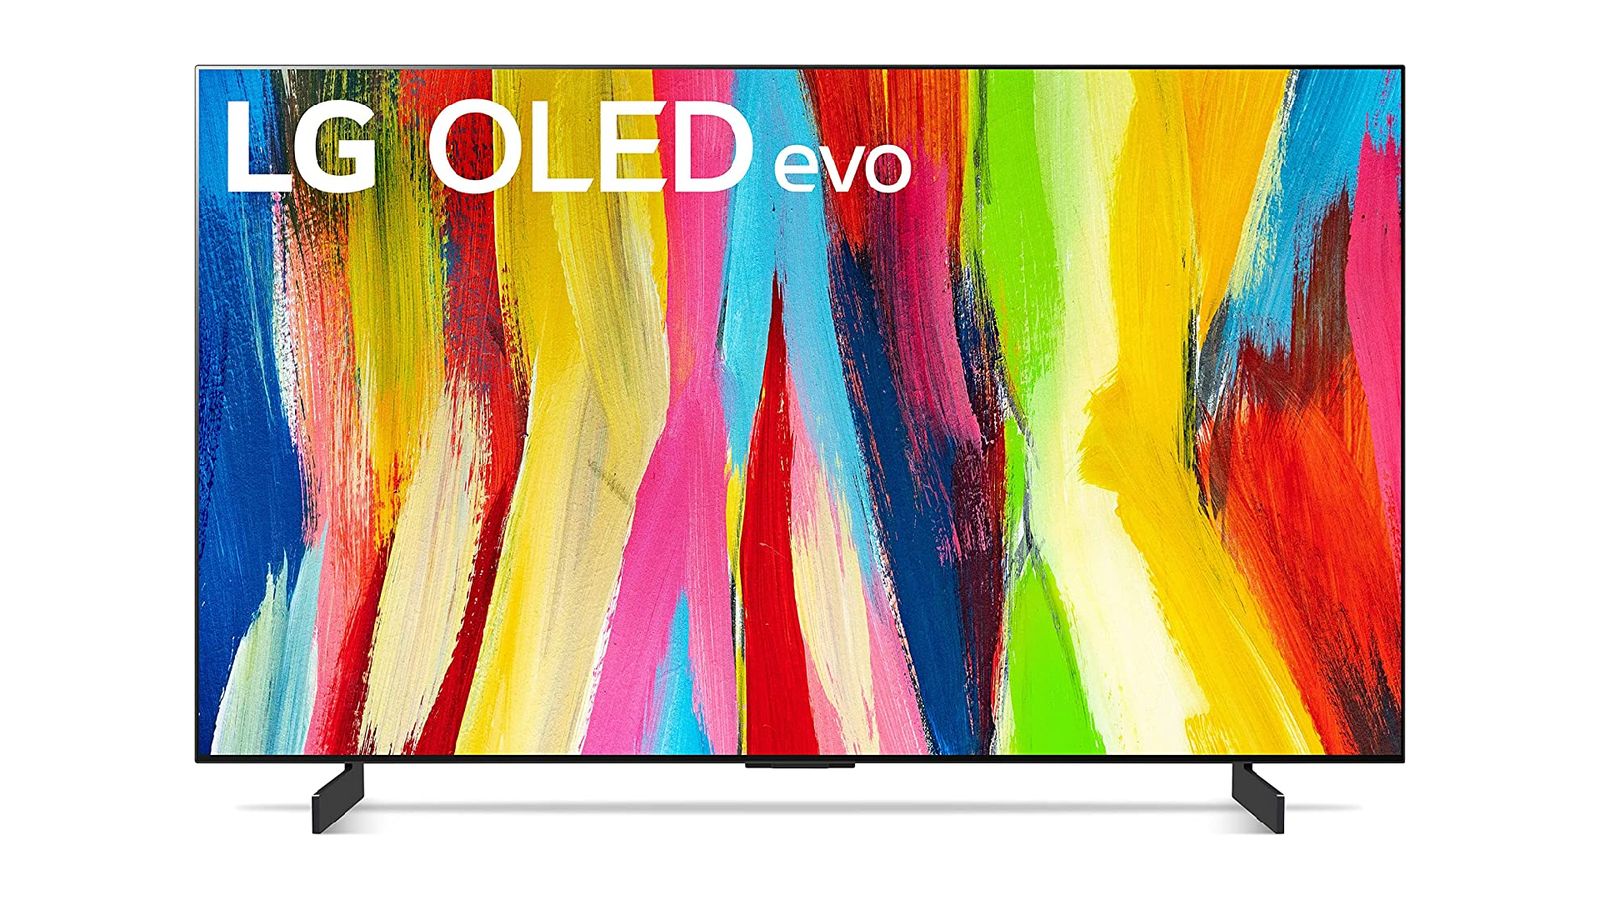 LG OLED evo C2 product image of a flat TV with multi-coloured paint stripes on the display.